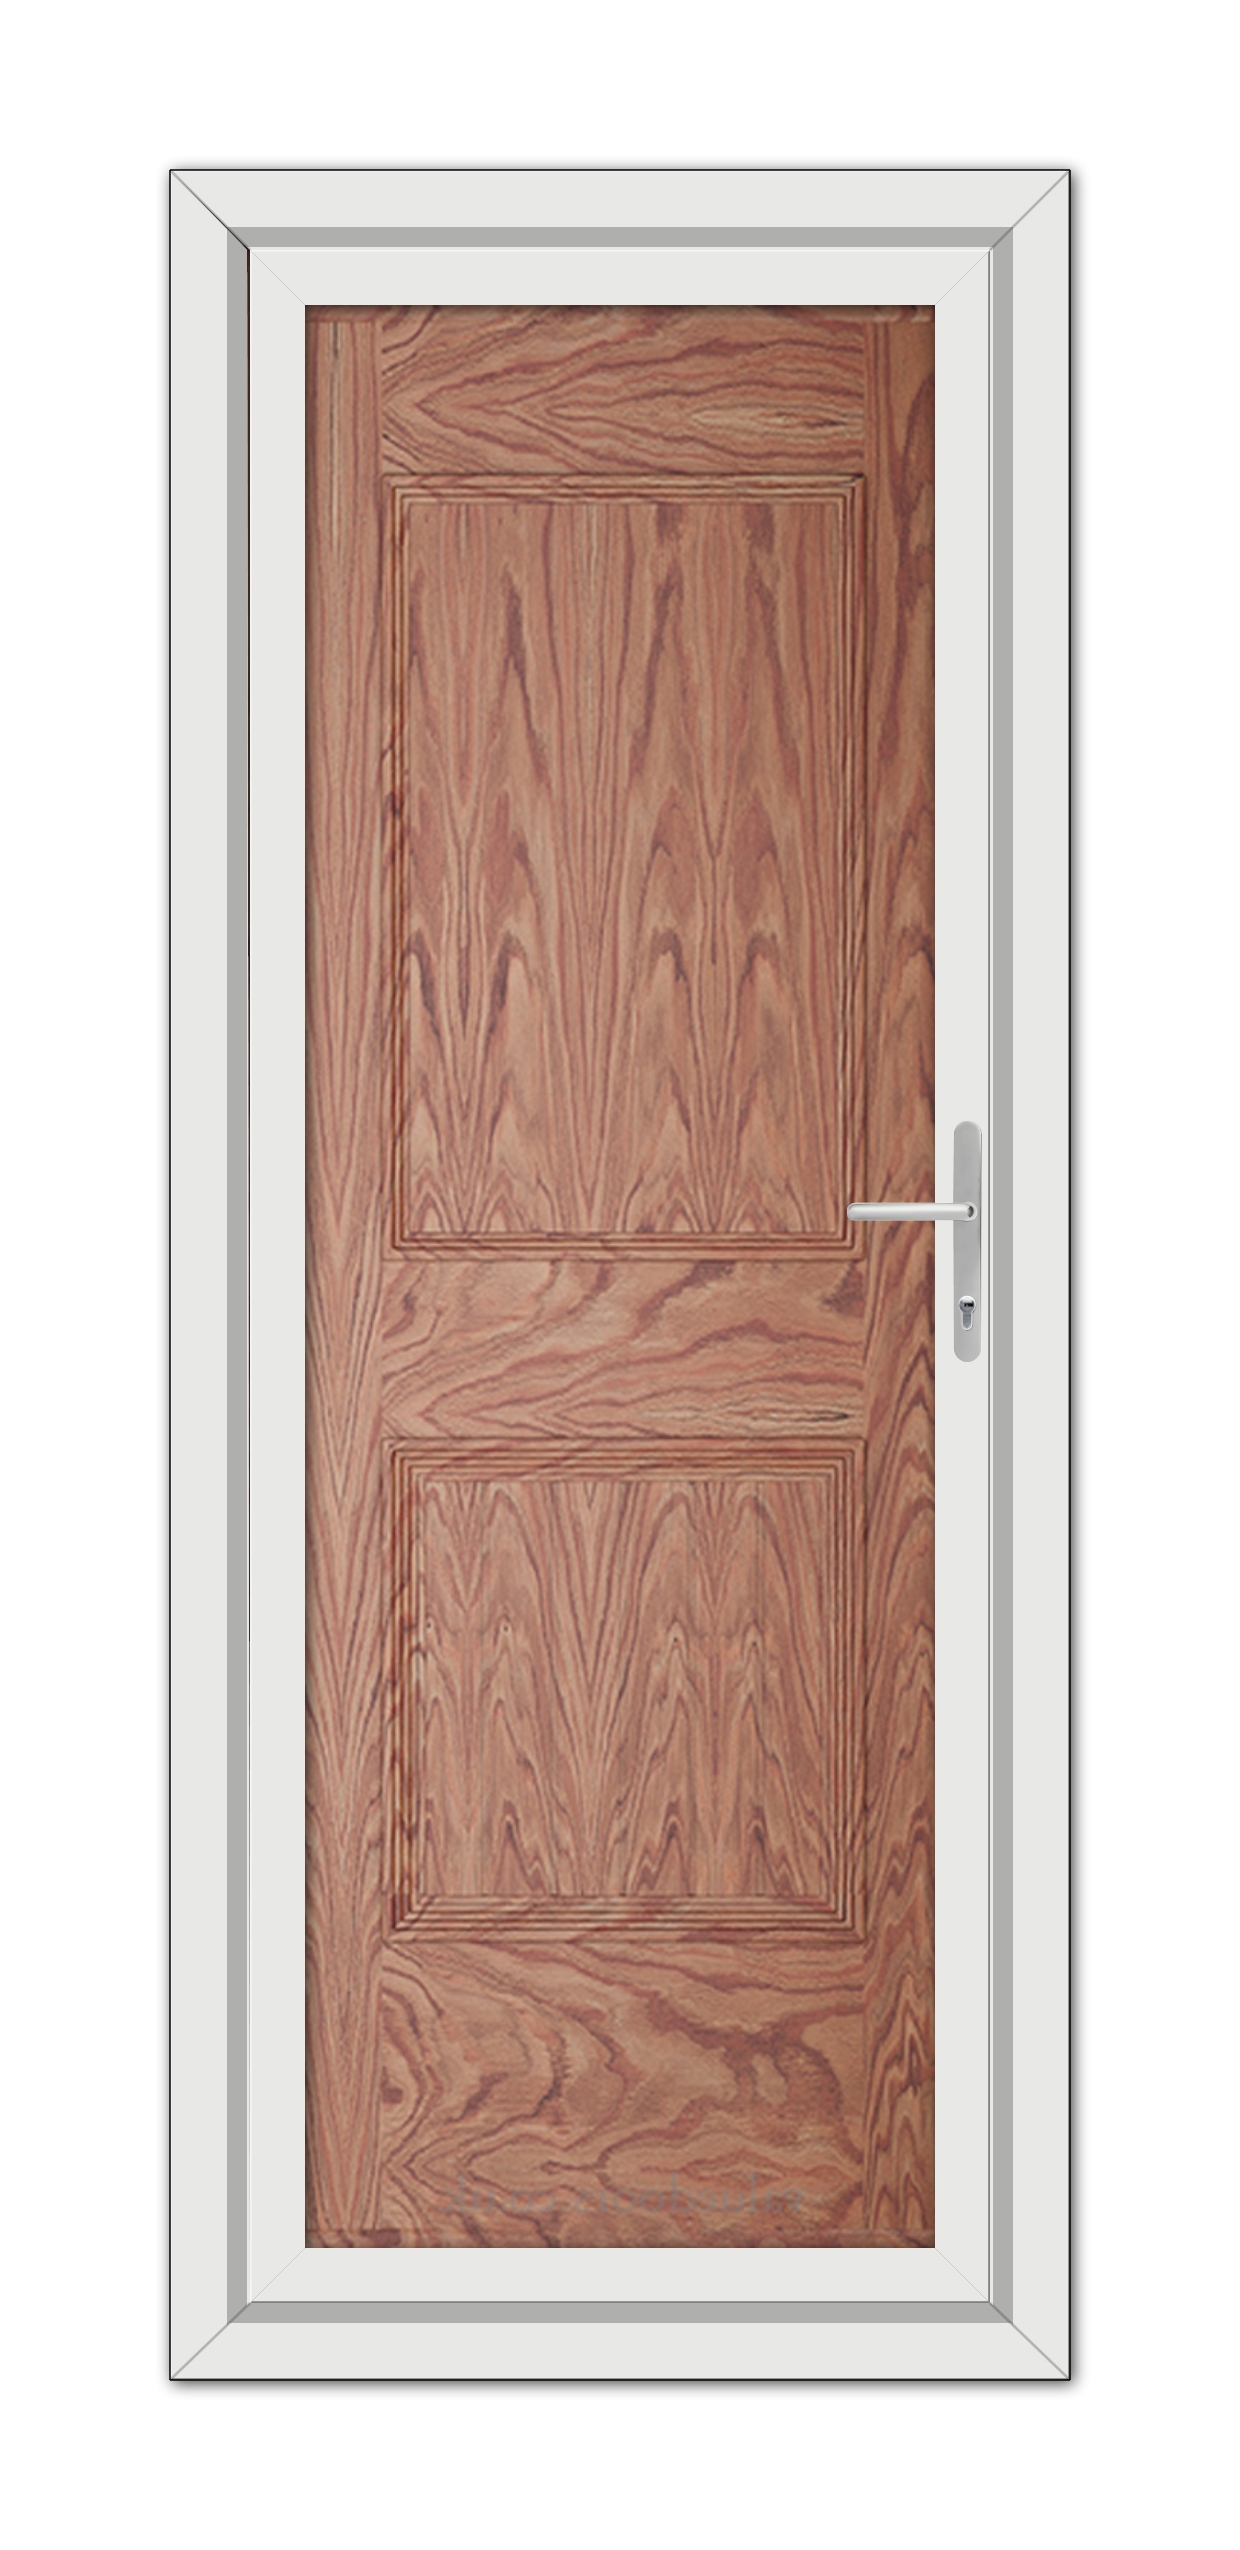 A Solid Oak Alnwick One uPVC Door with a vertical panel design and a metal handle, set within a white door frame.